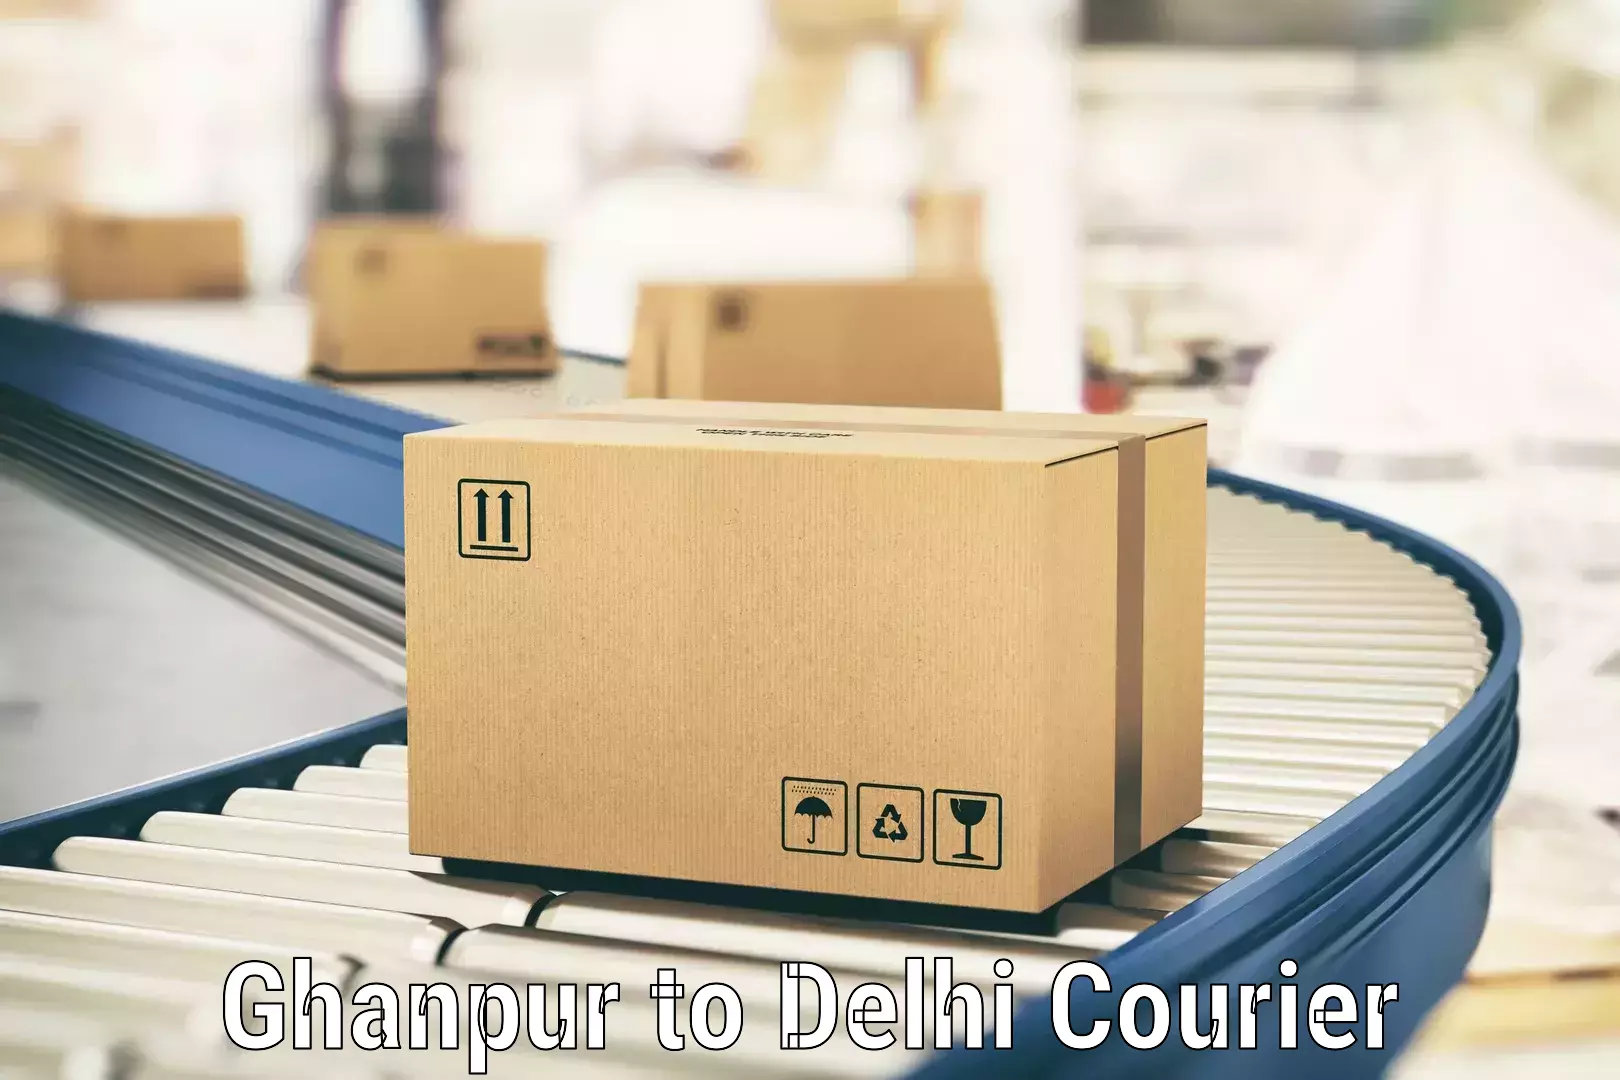 Global shipping solutions Ghanpur to IIT Delhi